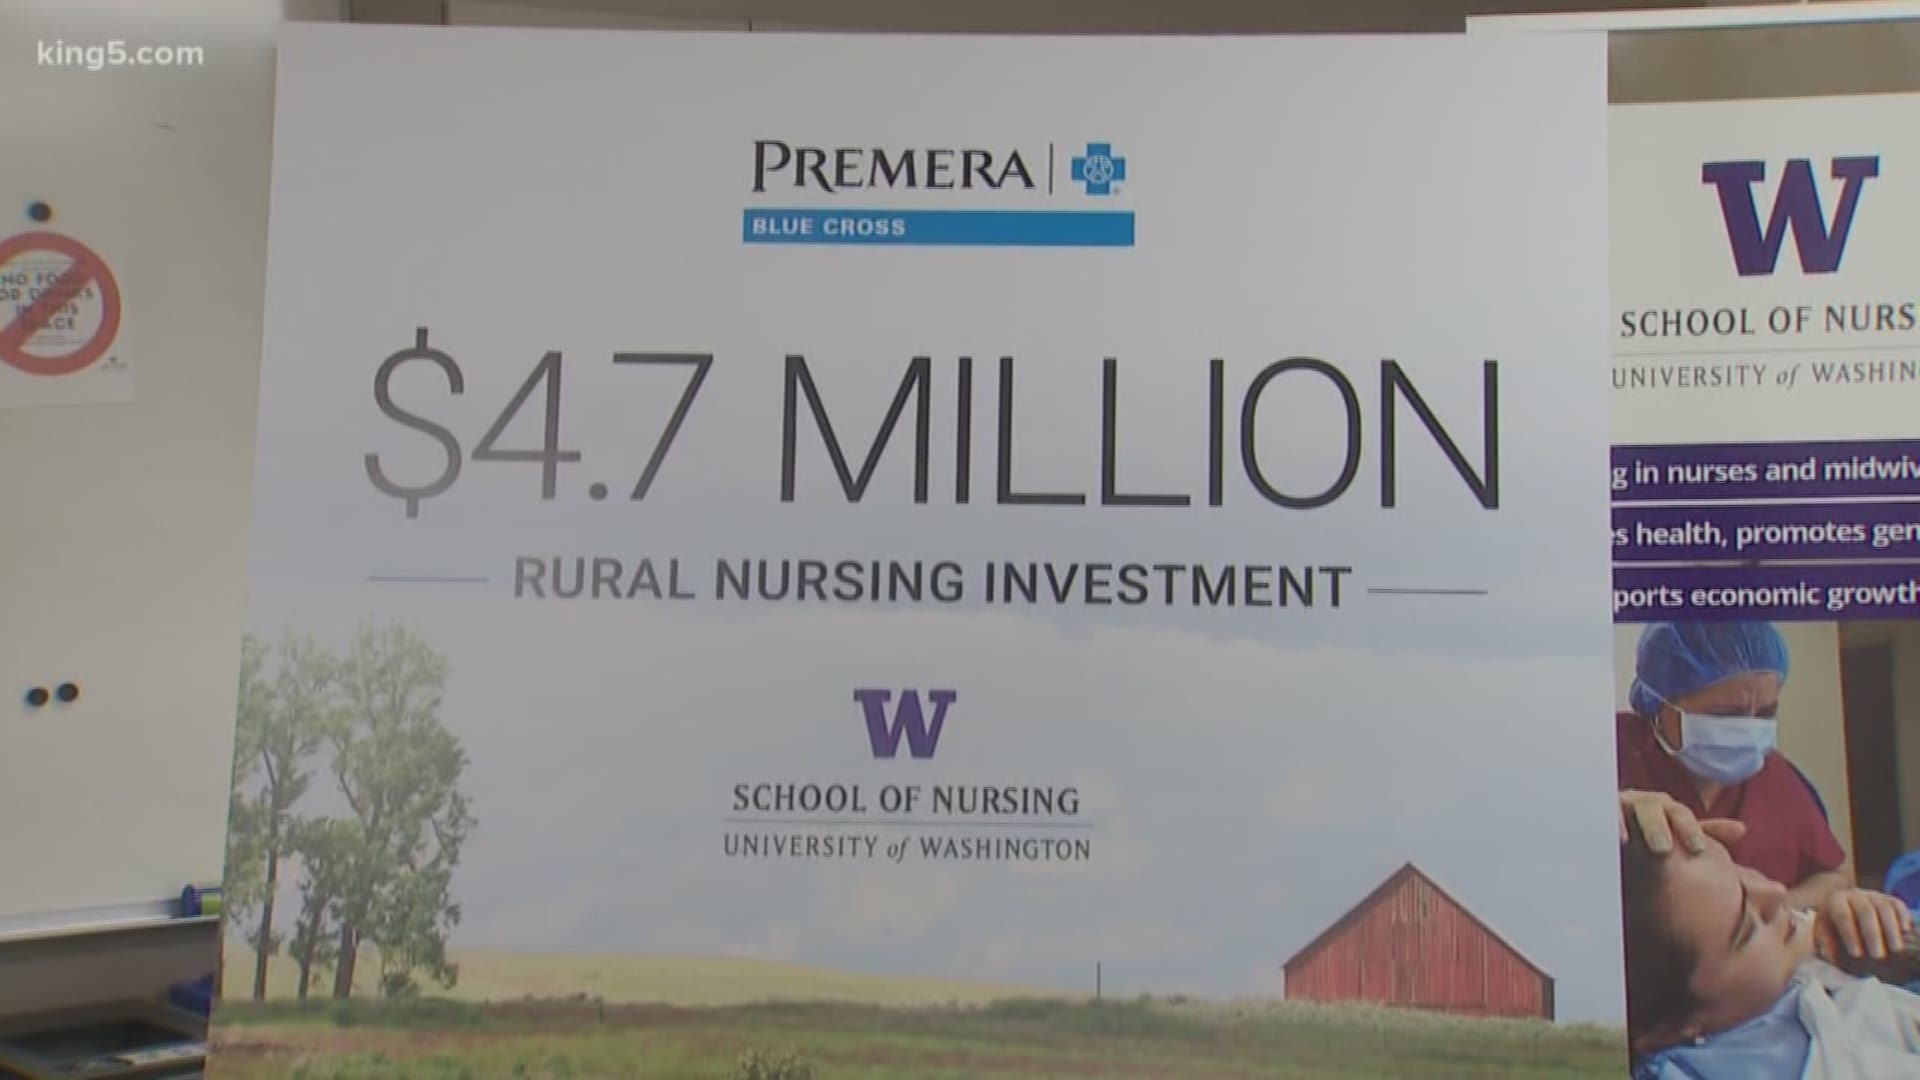 The program was created to address a lack of adequate healthcare in rural Washington state.